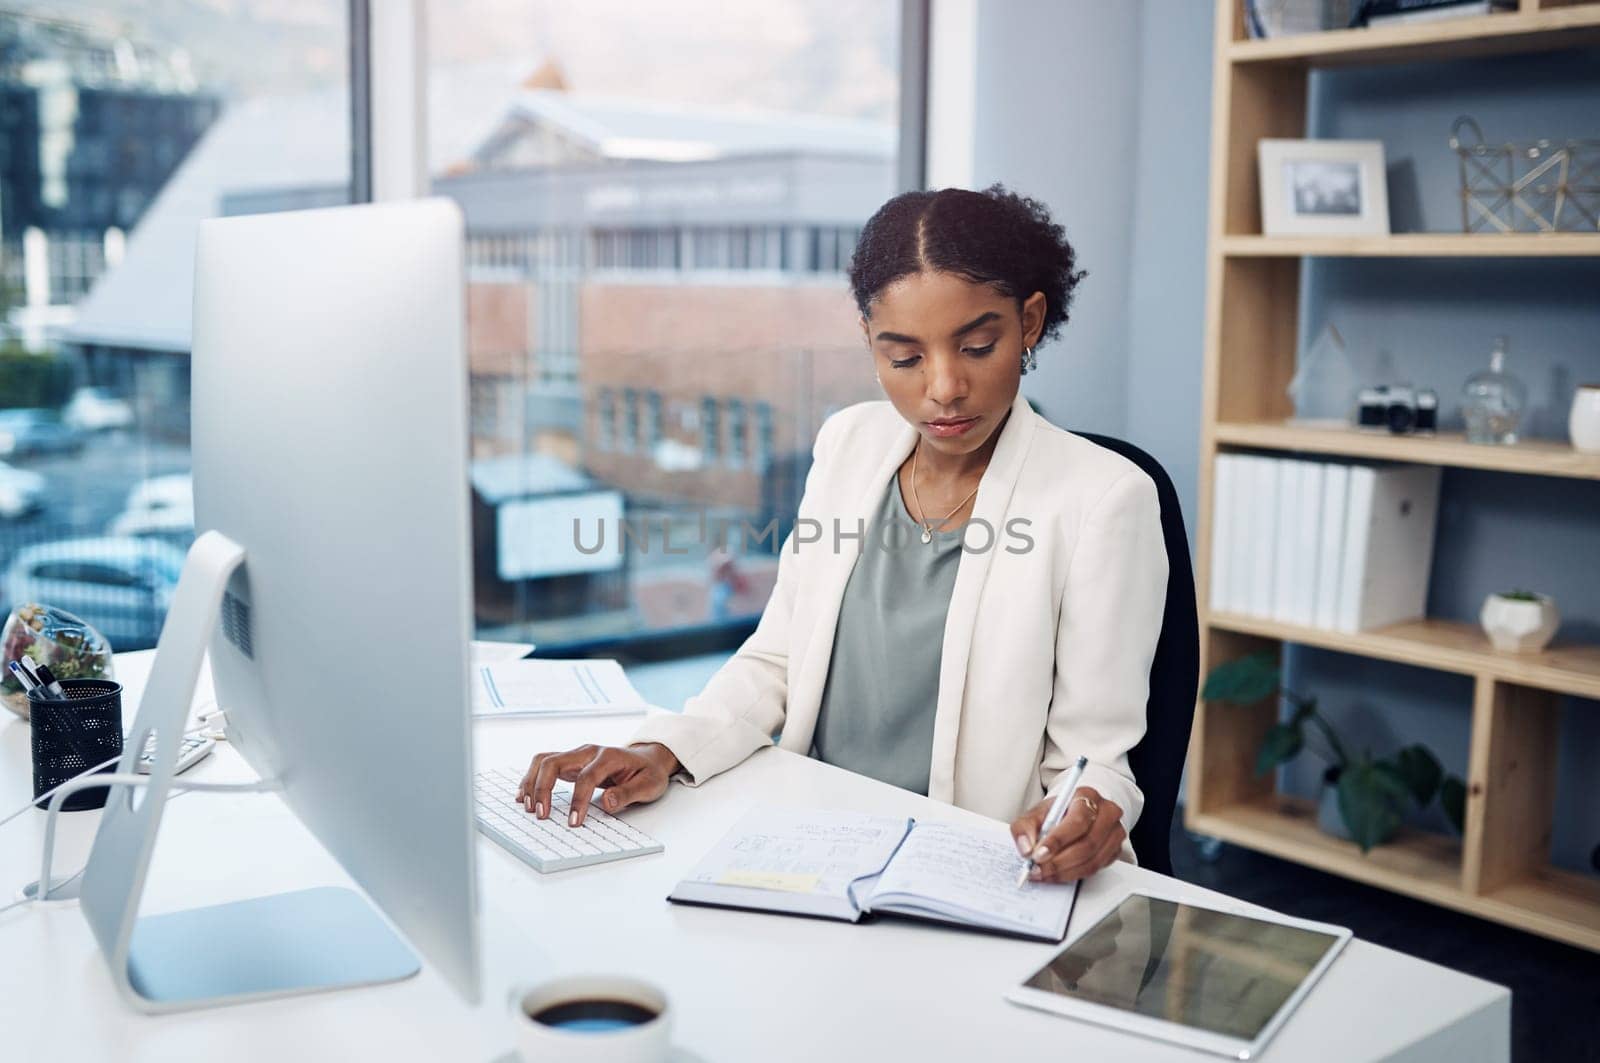 Office, research and woman at computer for notes, business schedule or online profit report at agency. Budget, planning and consultant at desk with notebook, writing and financial risk management.